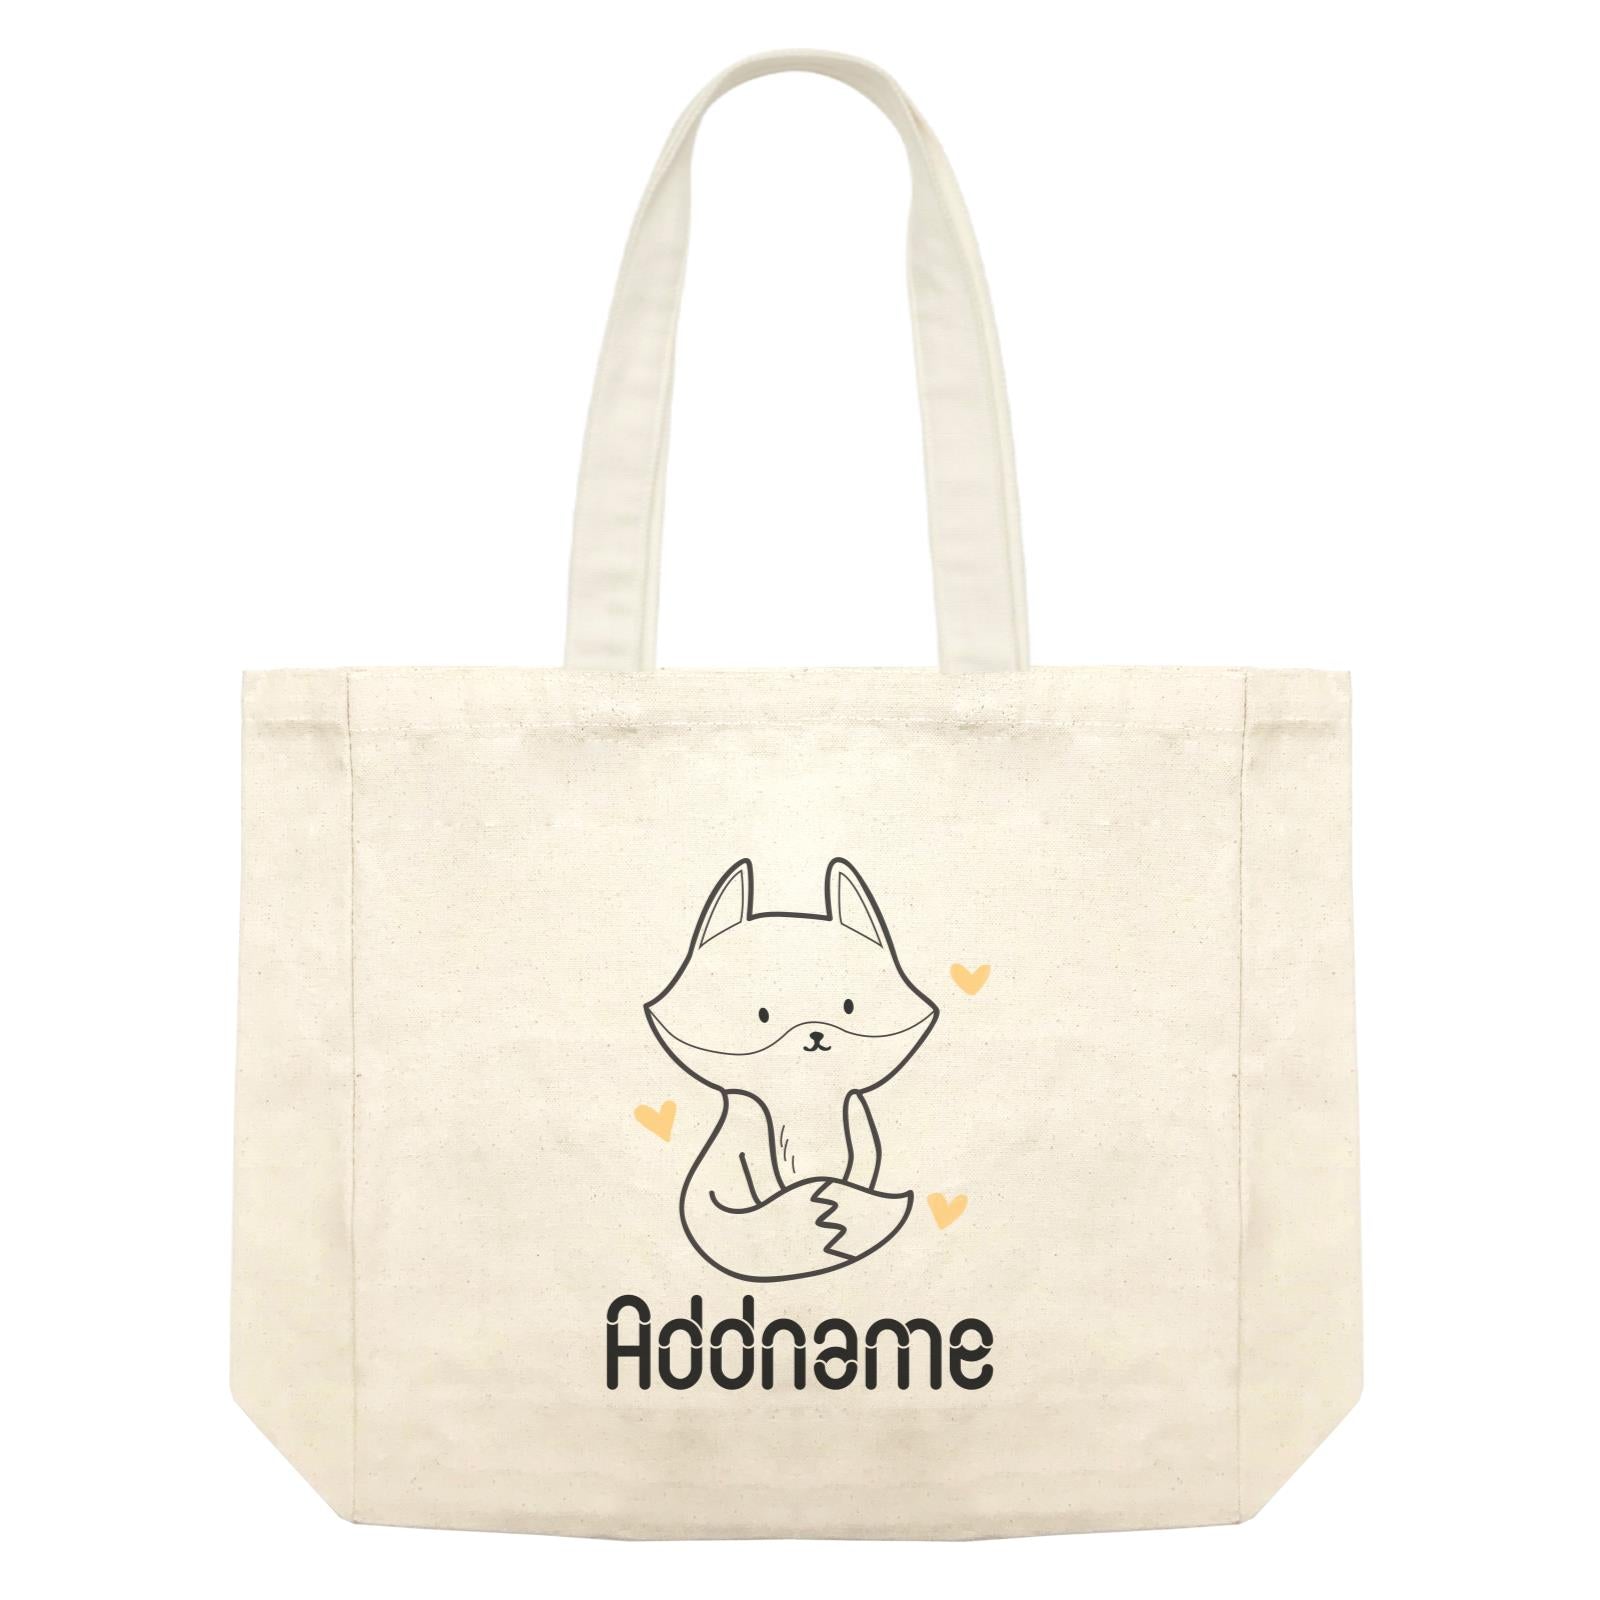 Coloring Outline Cute Hand Drawn Animals Fox Fox Addname Shopping Bag